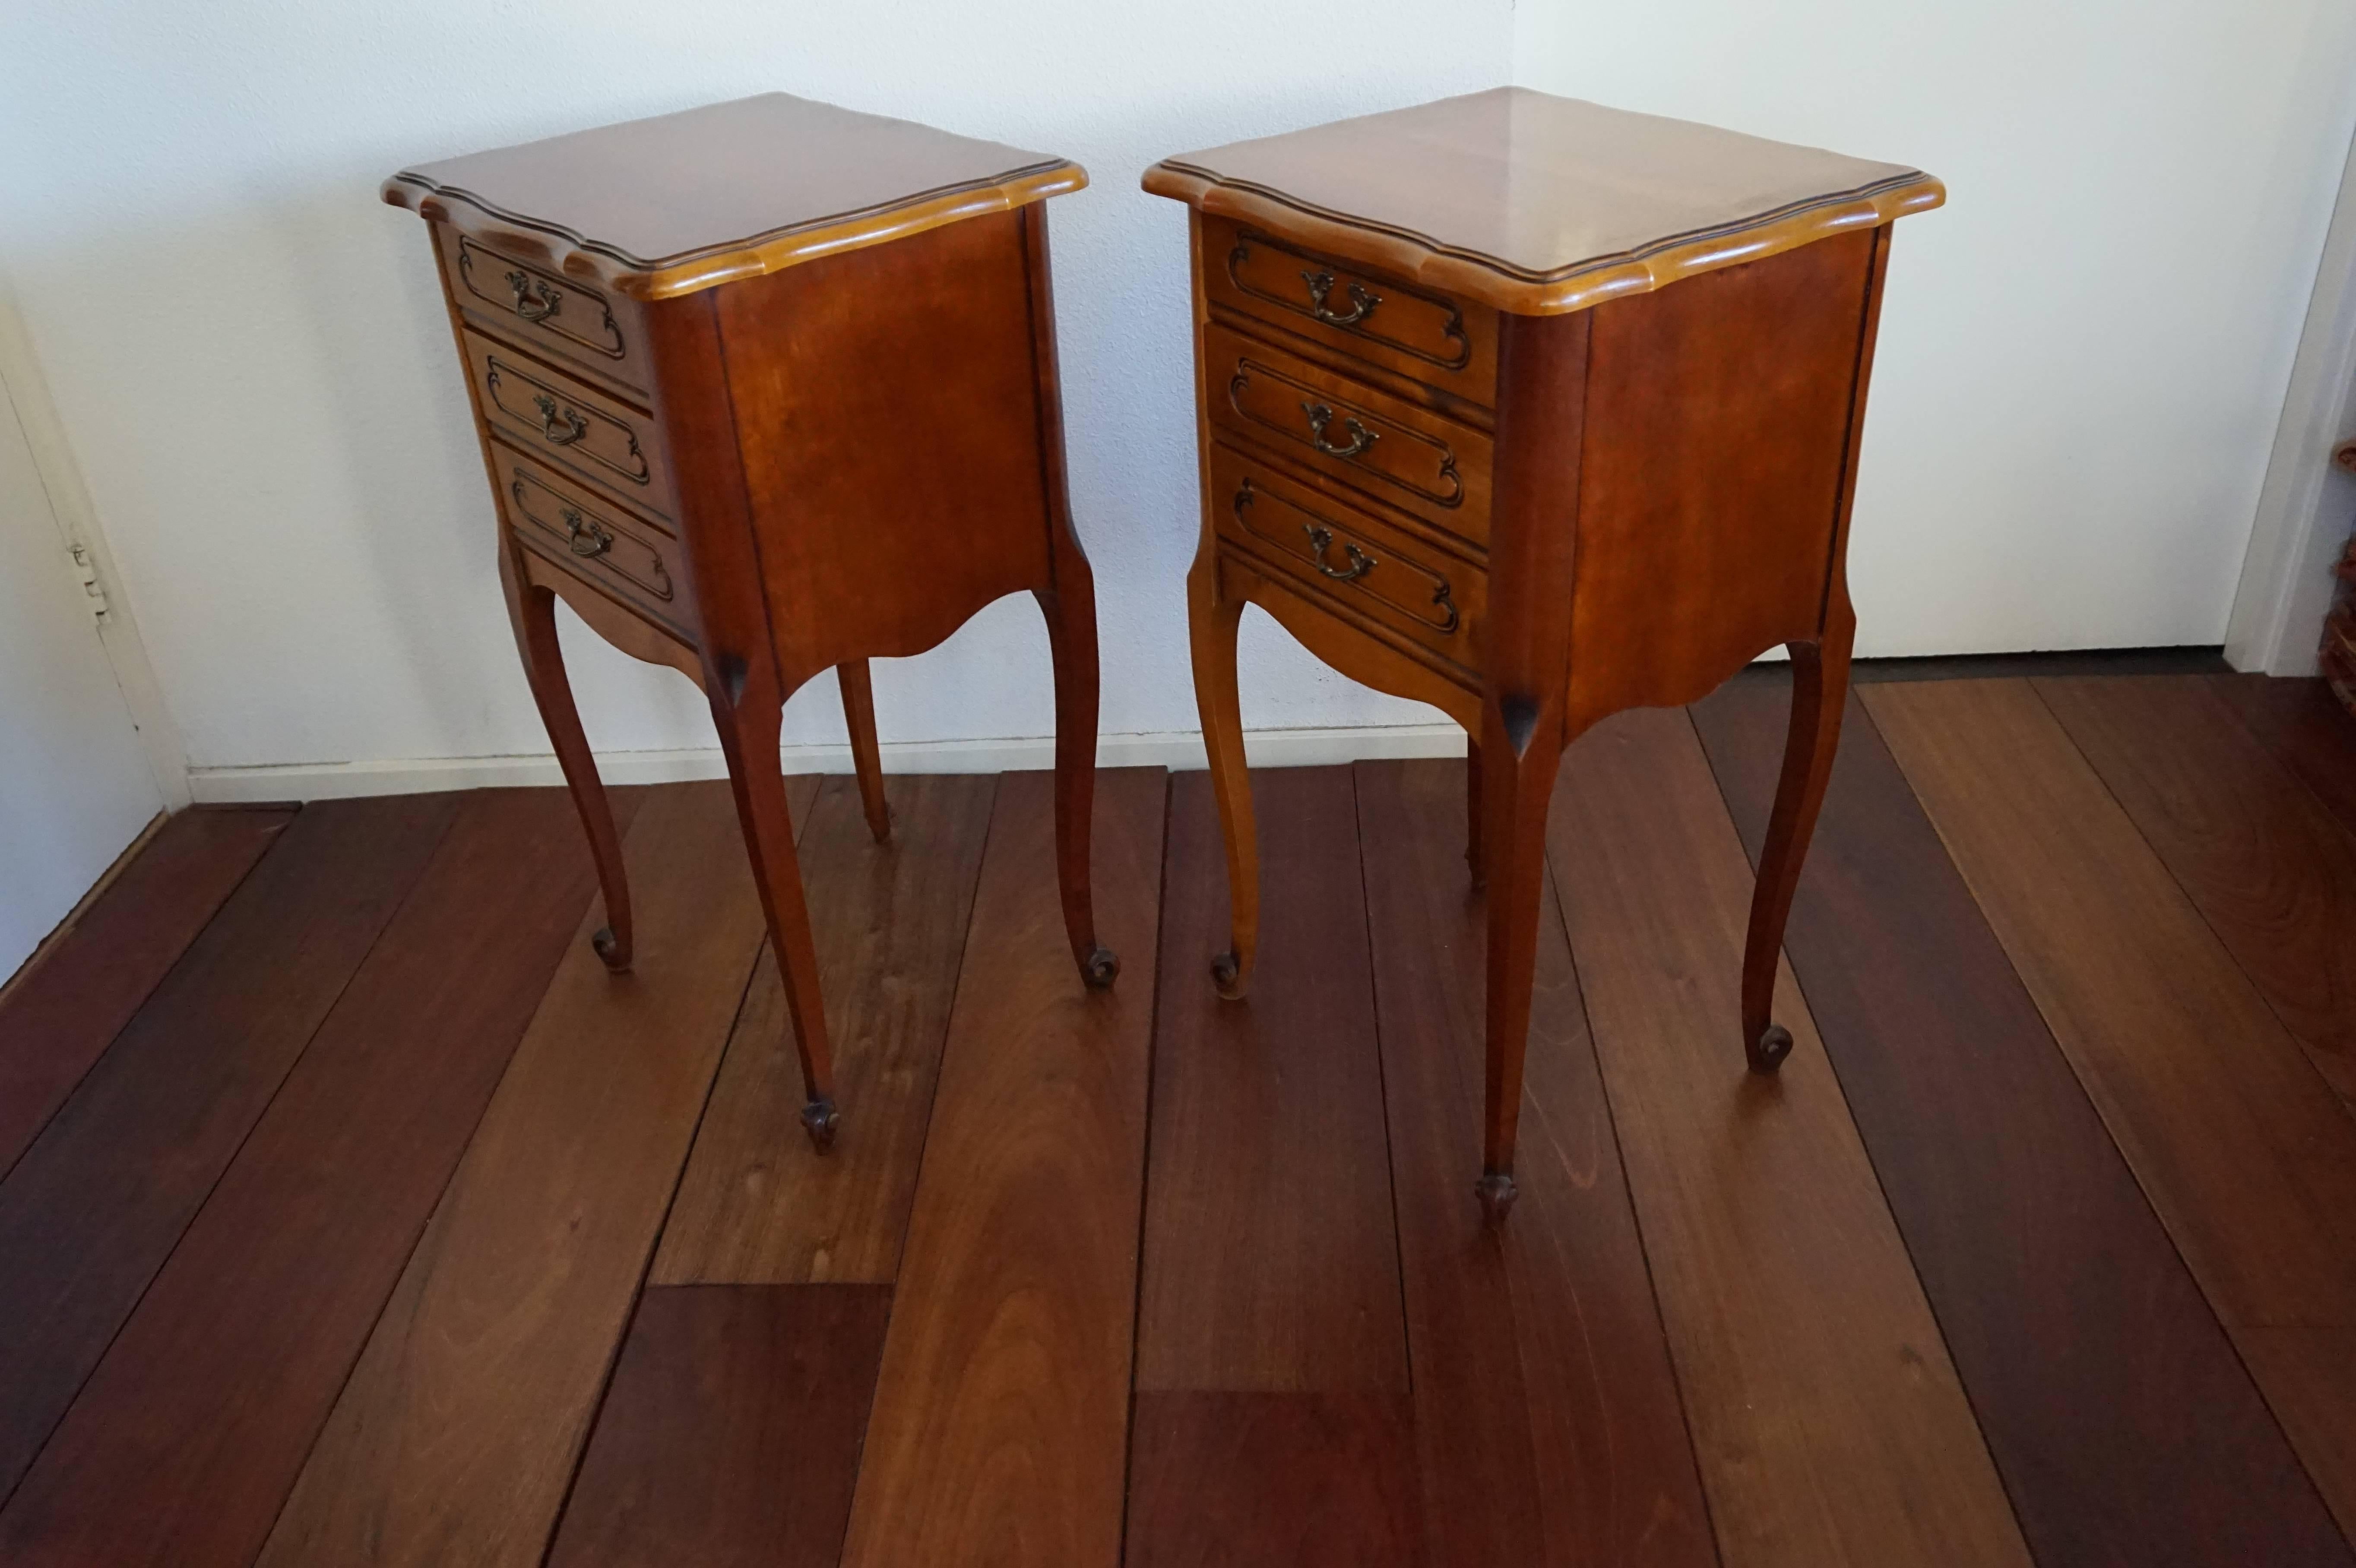 Elegant pair of French bedside cabinets.

These stylish nightstands were made in France by Sourisseau and we date them from the 1970s. They are in marvelous condition and as clean as one could hope. On either side of a box spring they will look